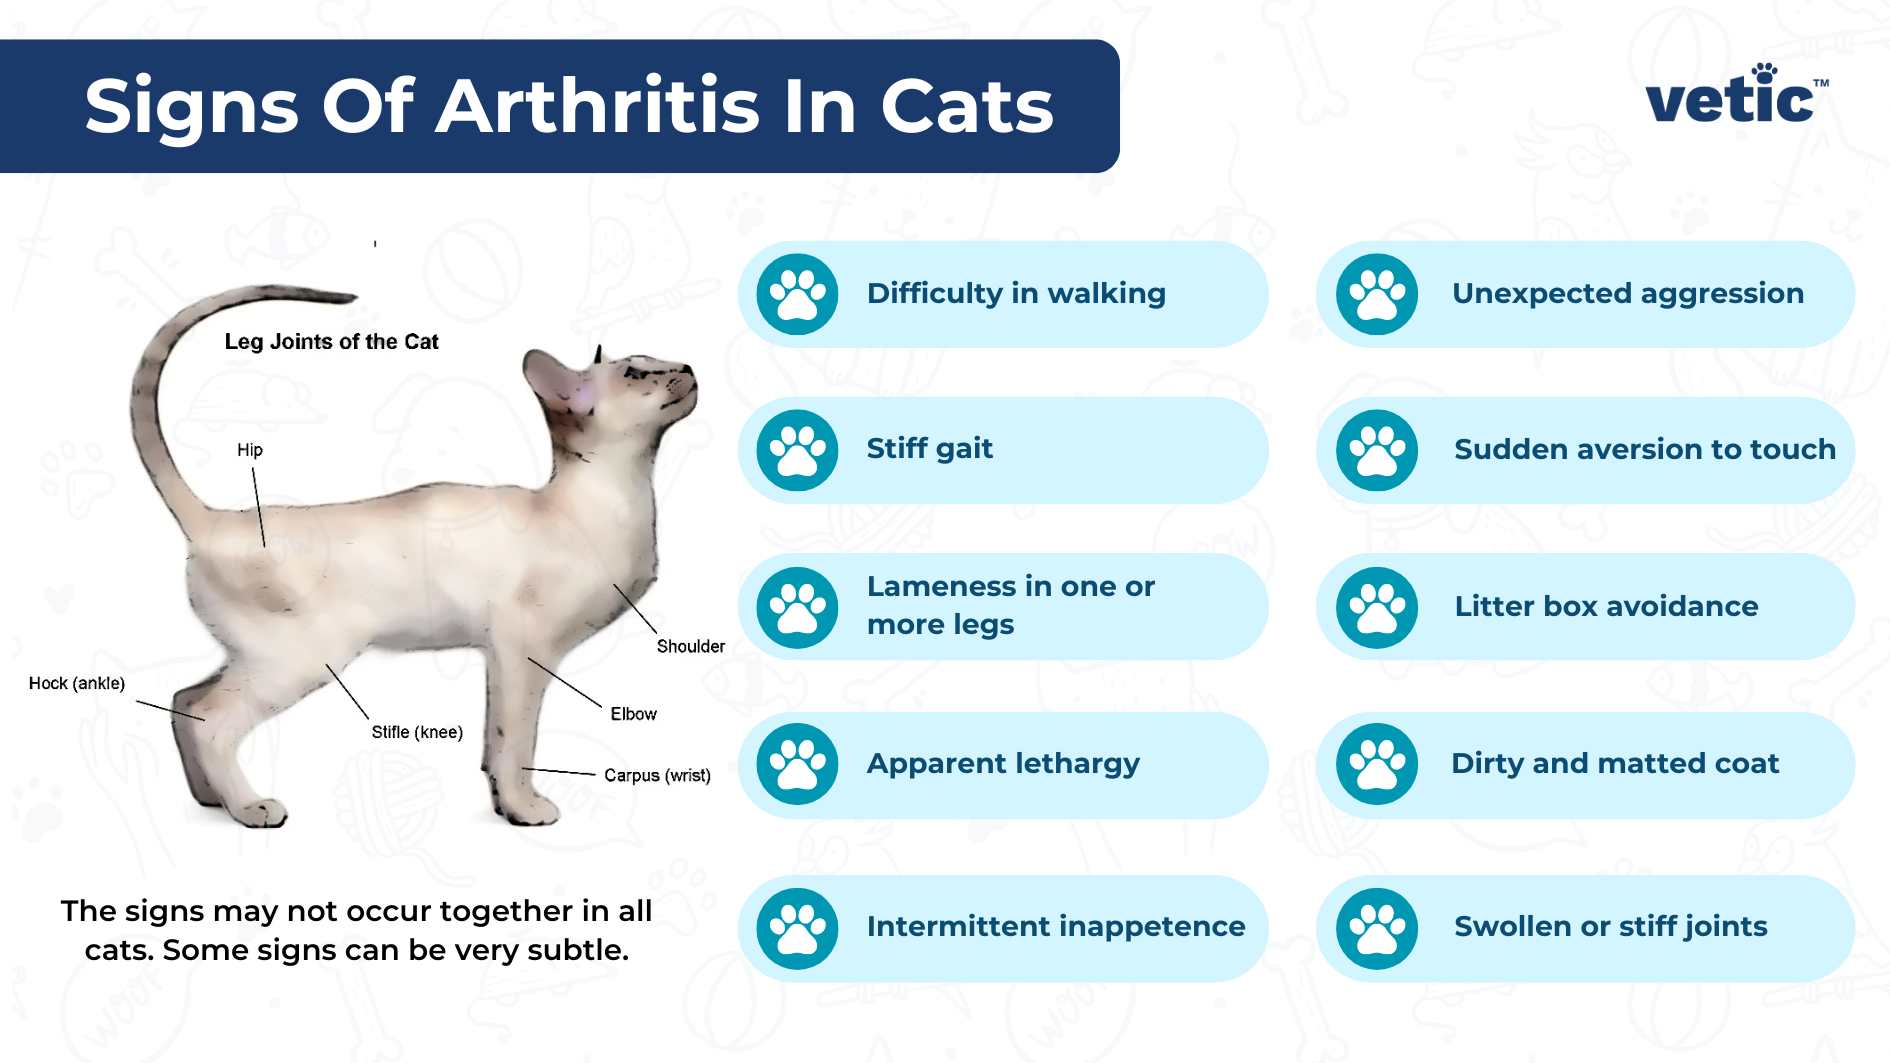 An informative image detailing the signs of arthritis in cats, including a diagram of a cat with labeled leg joints and a list of symptoms. The image, titled “Signs Of Arthritis In Cats” and presented by “vetic”, features an illustration of a cat with its leg joints labeled, including the hip, hock (ankle), stifle (knee), elbow, carpus (wrist), and shoulder. On the right side, there are blue bubbles listing symptoms such as difficulty in walking, stiff gait, lameness in one or more legs, apparent lethargy, intermittent inappetence, unexpected aggression, sudden aversion to touch, litter box avoidance, dirty and matted coat, and swollen or stiff joints. A note at the bottom indicates that these signs may not all occur together and can be very subtle.